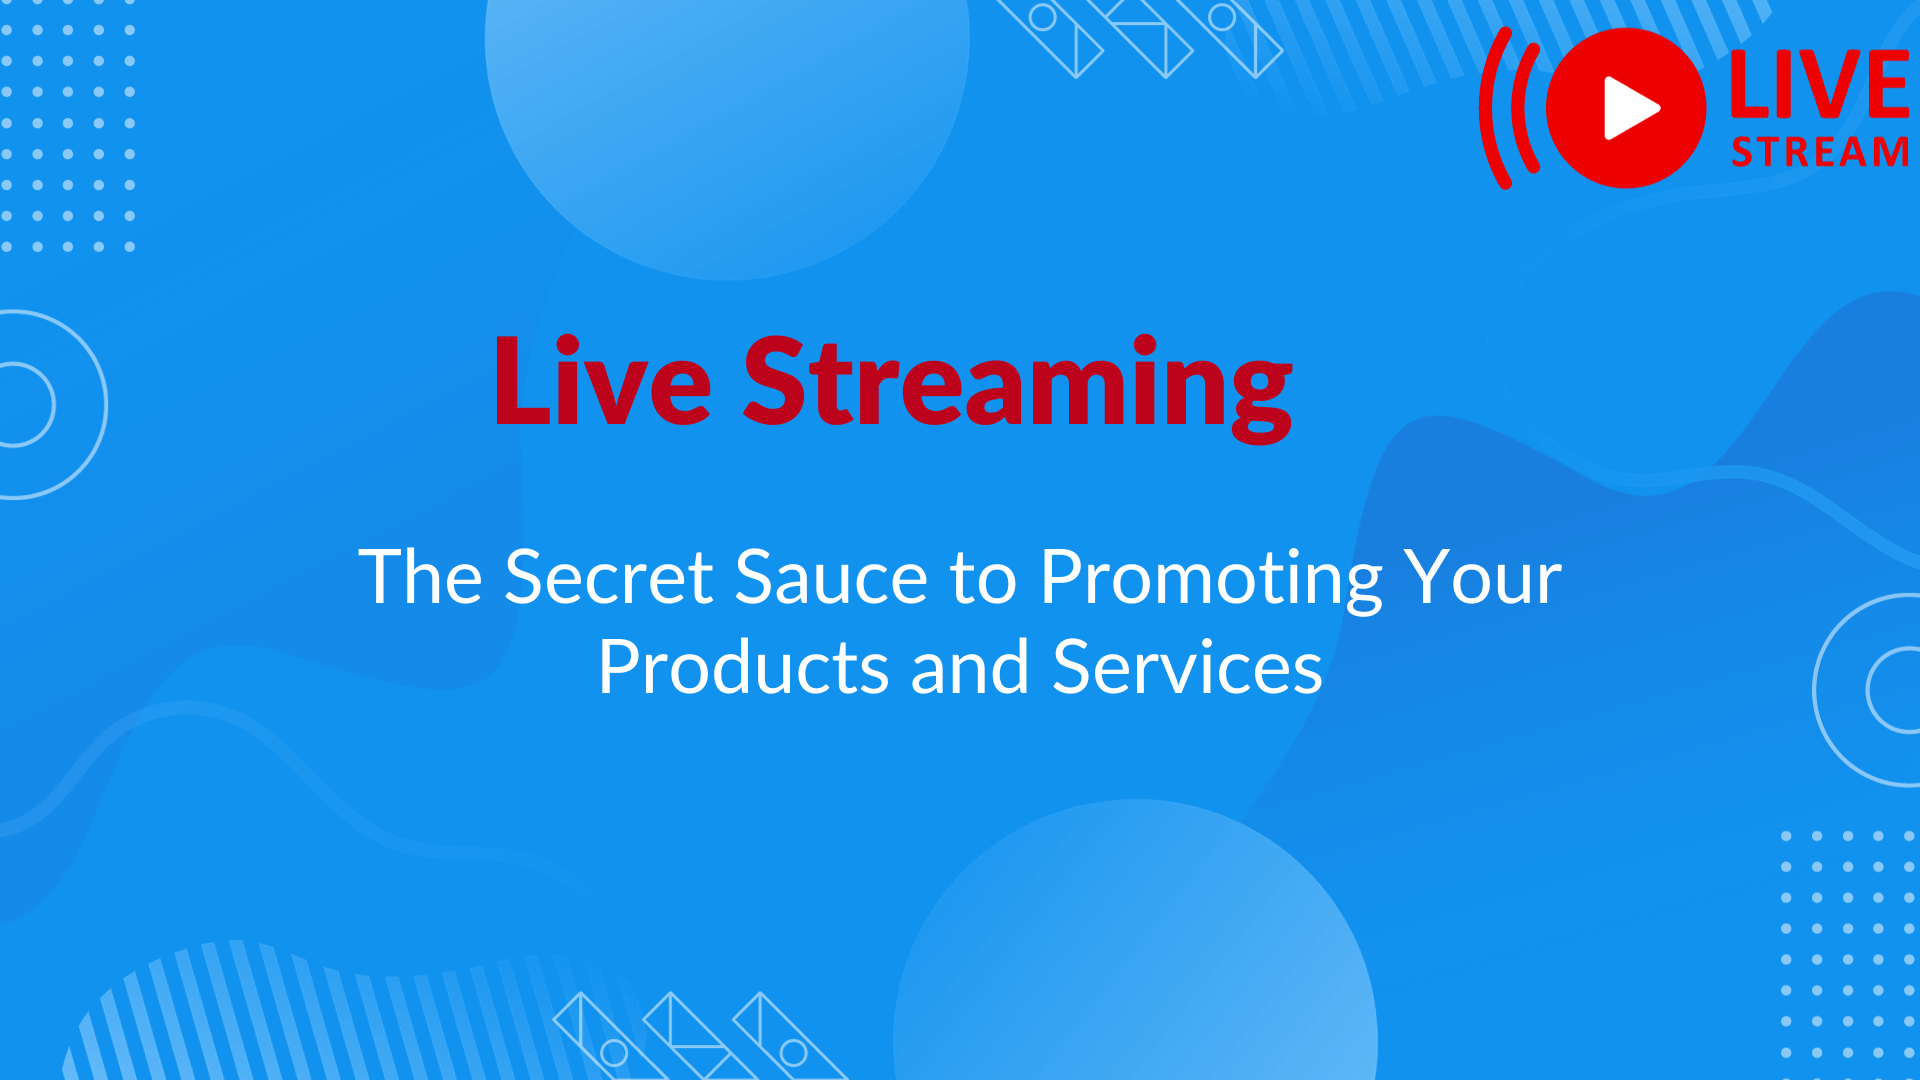 Live Streaming The Secret Sauce to Promoting Your Products and Services